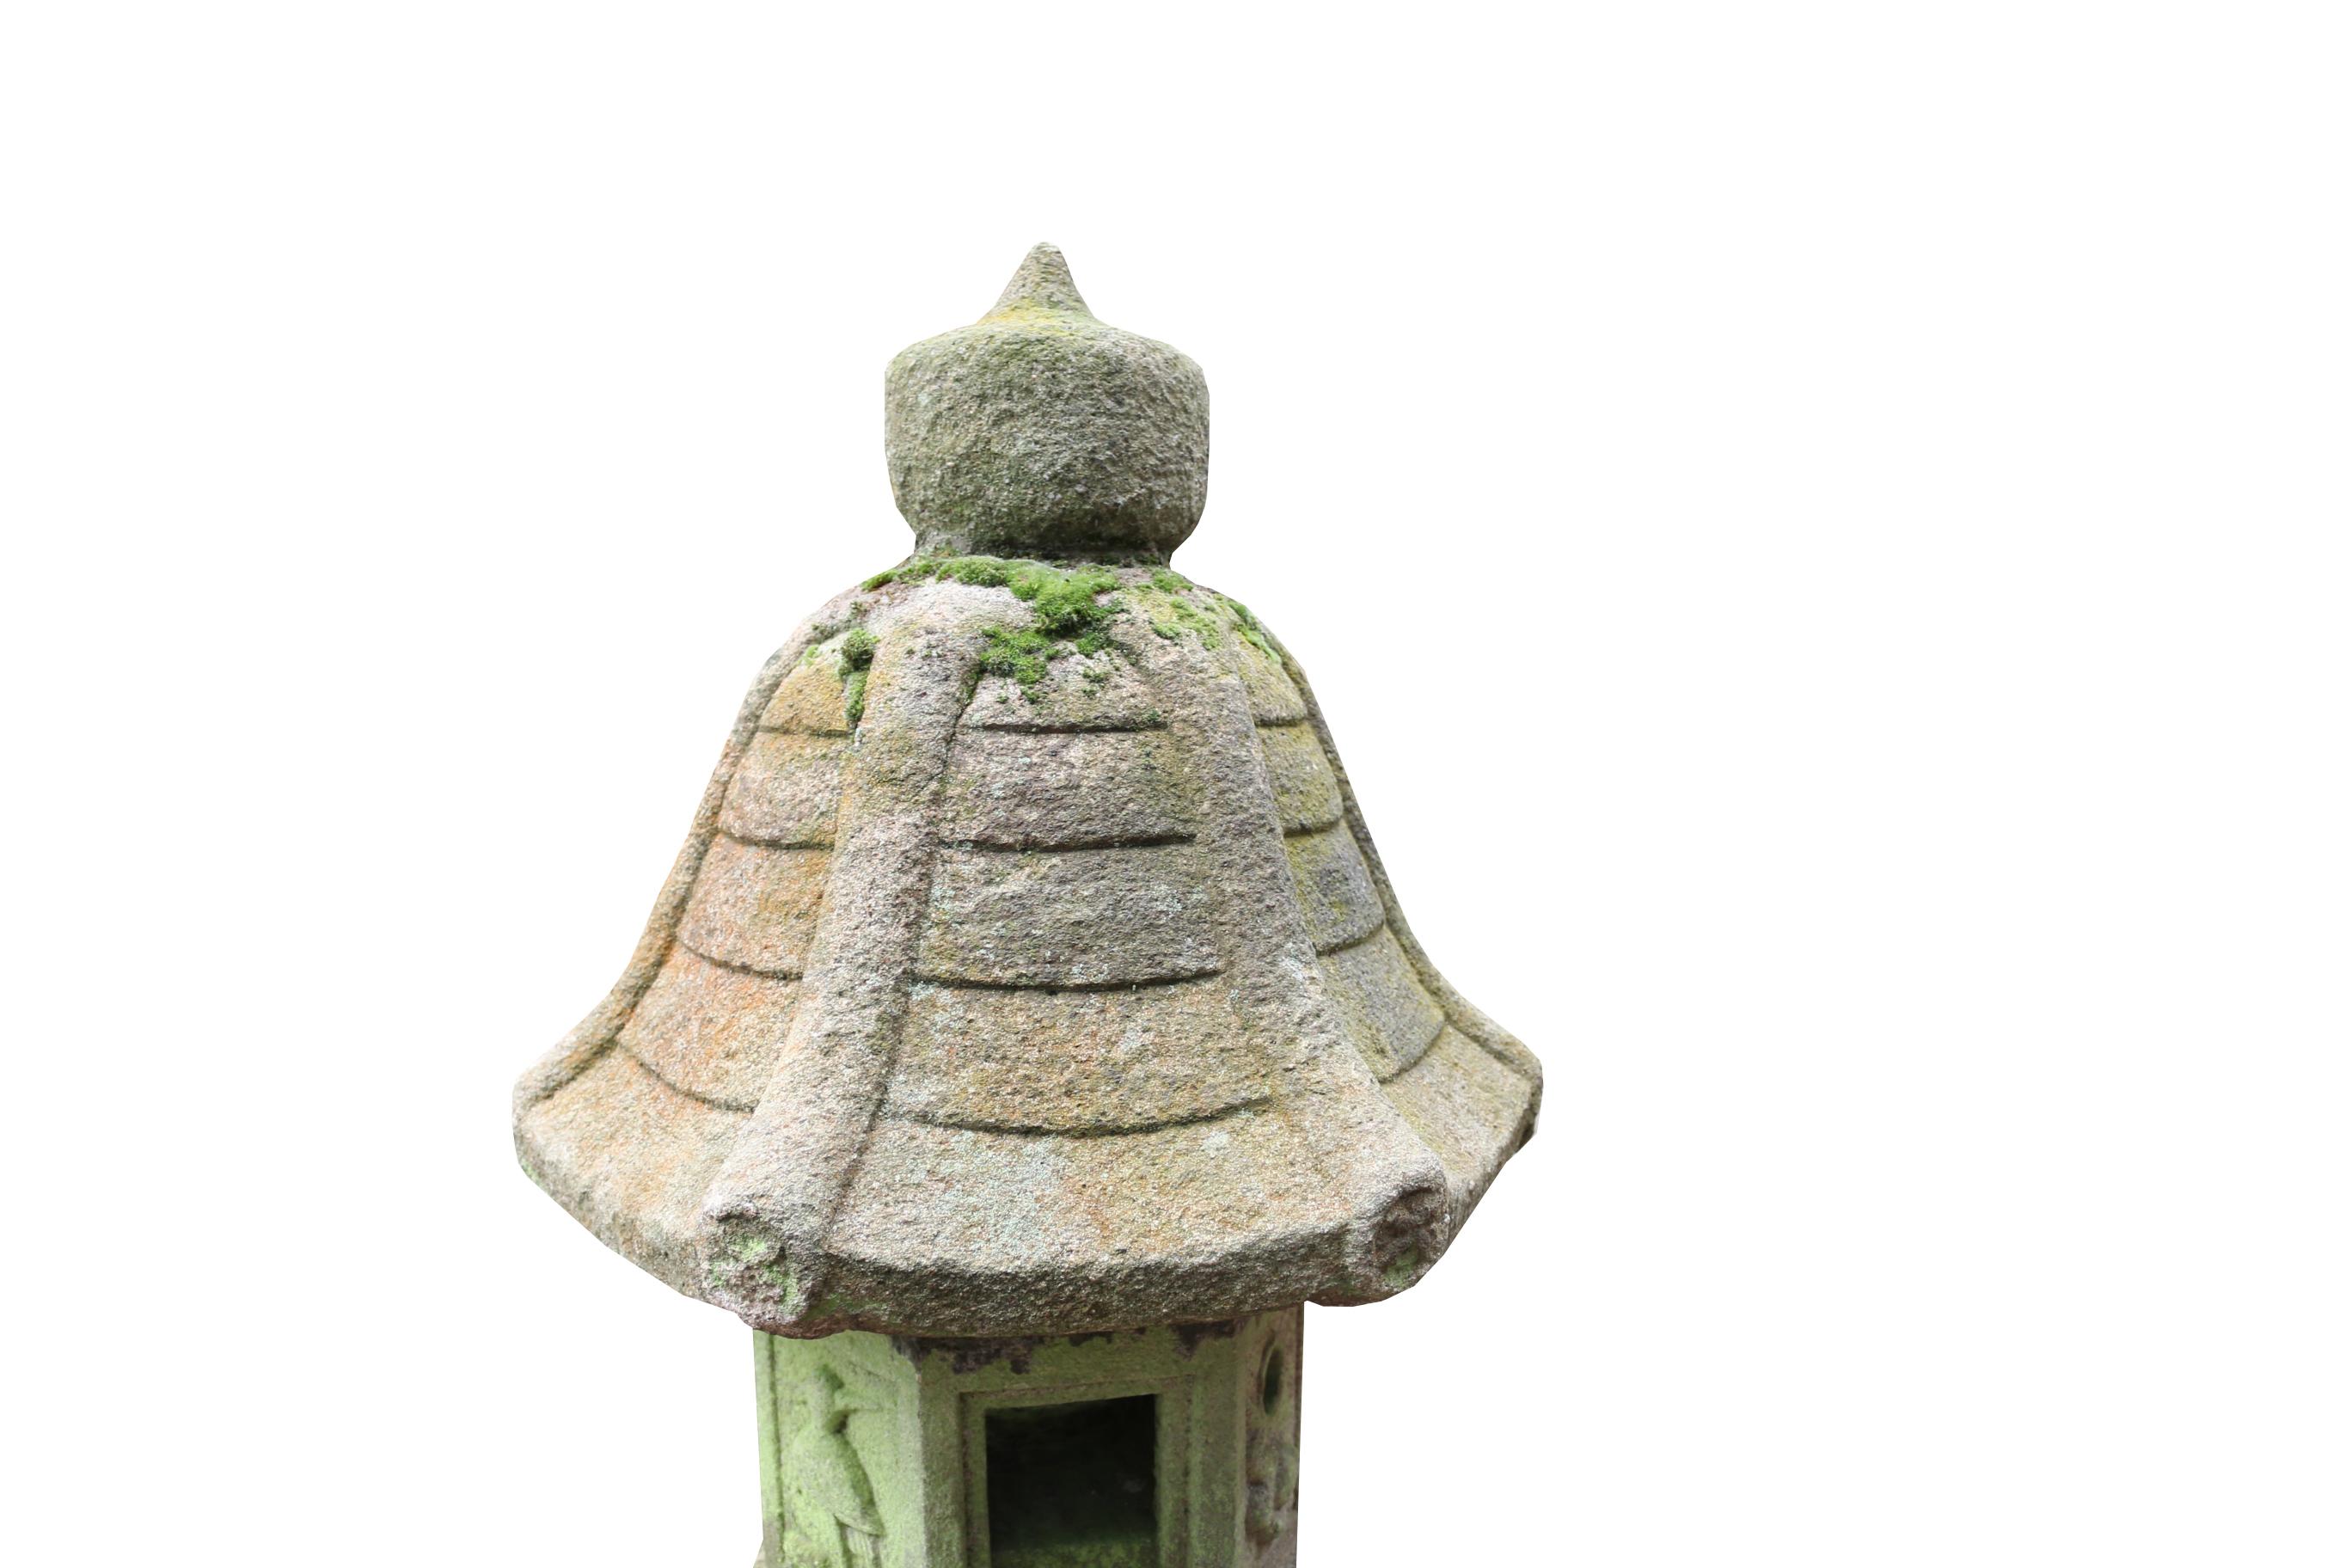 About

A Japanese carved granite Kasuge / Kasugna or Toro lantern. Meji Period (1868-1912). Hand carved from Granite. This was reclaimed from a private residence in the south of England.

Condition Report

Structurally good, with no cracks or